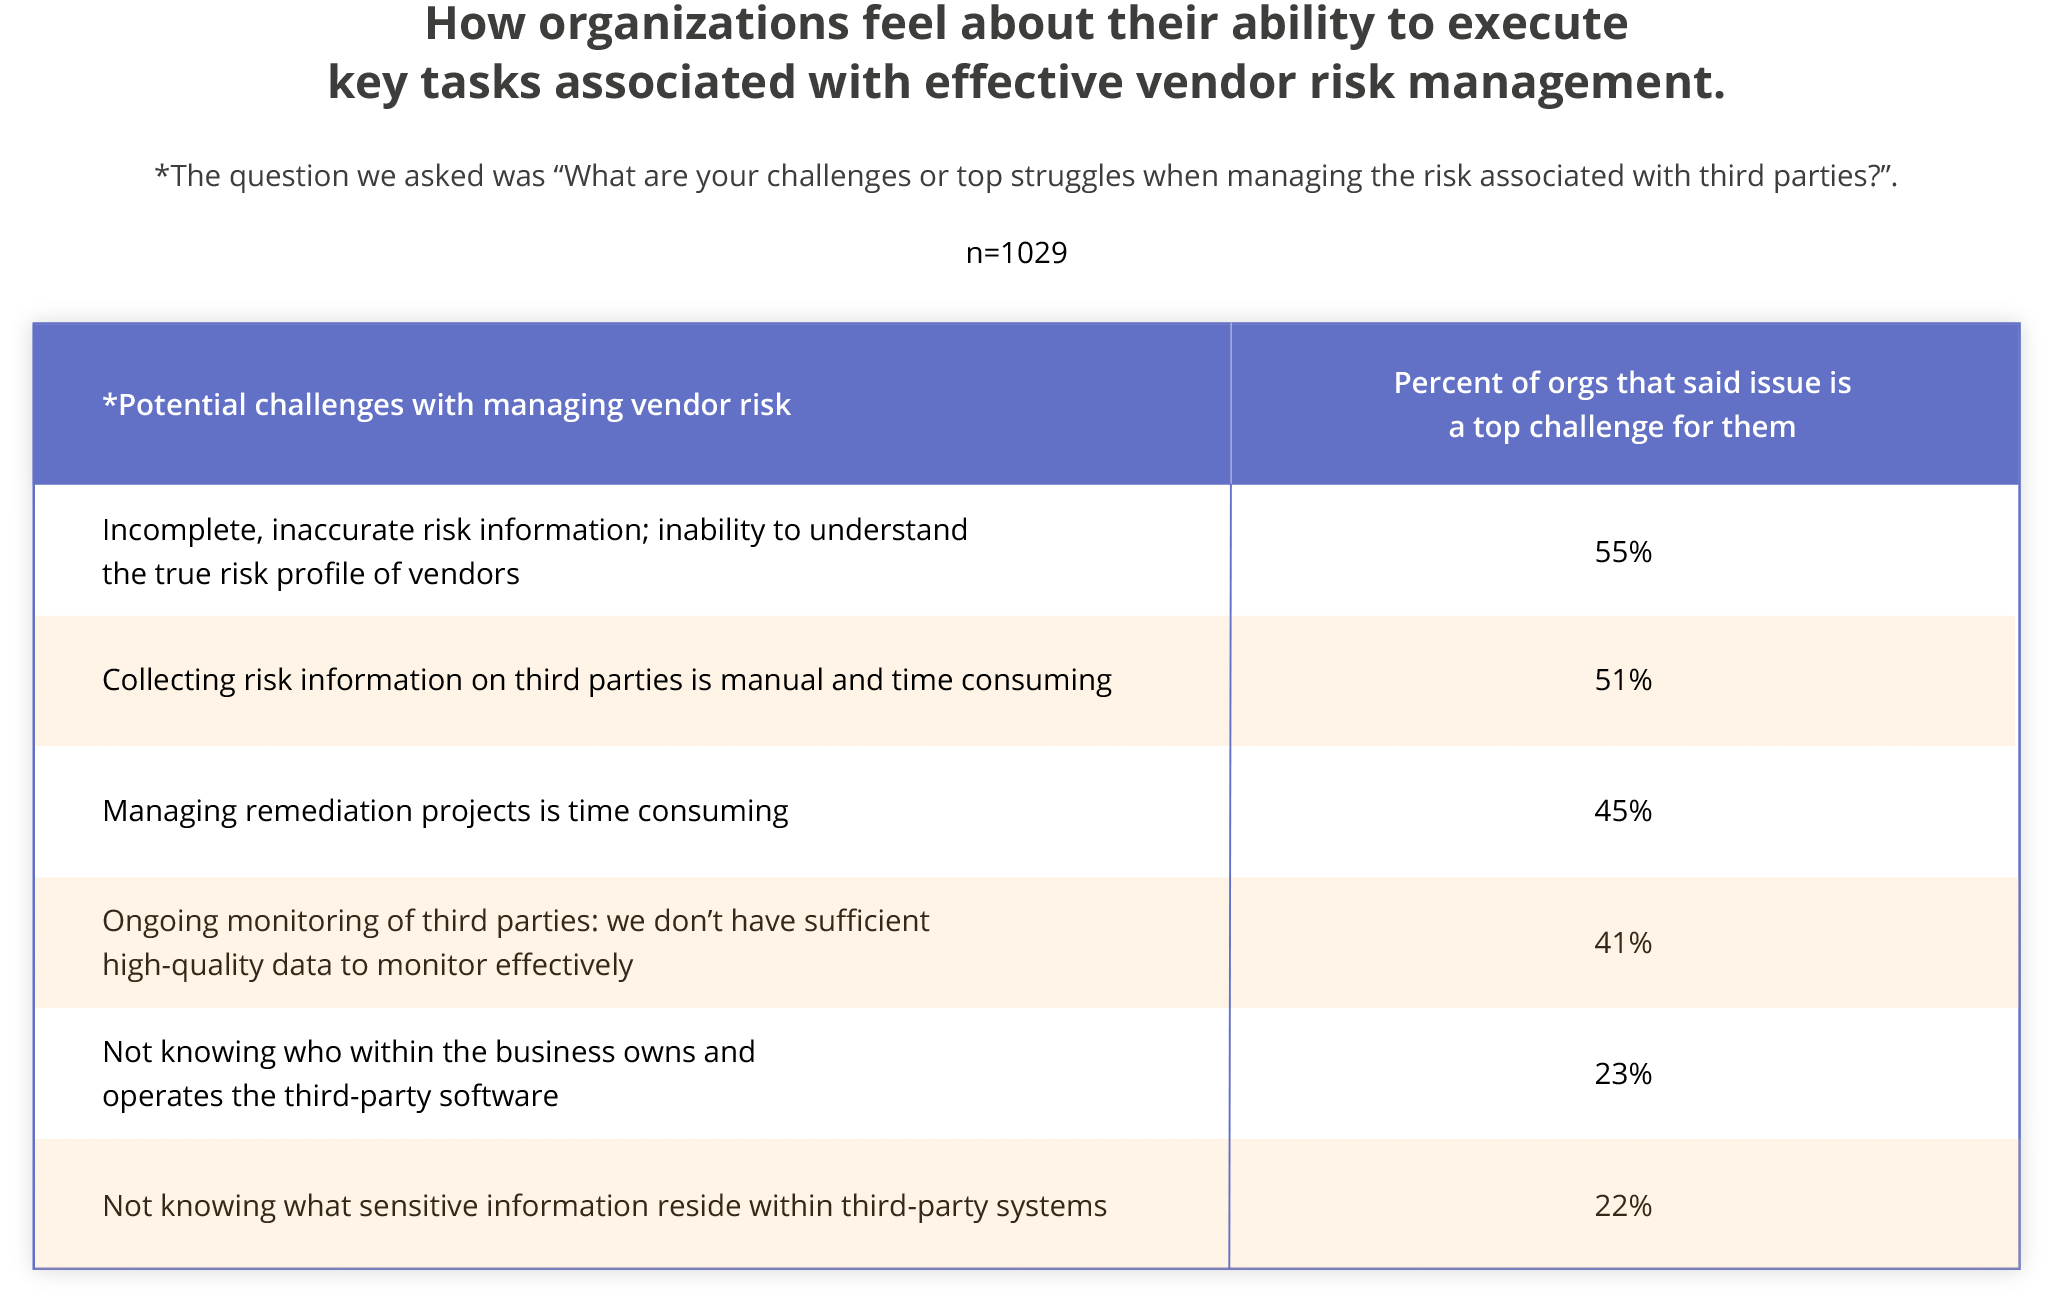 How organizations feel about their ability to execute key tasks associated with effective vendor risk management.